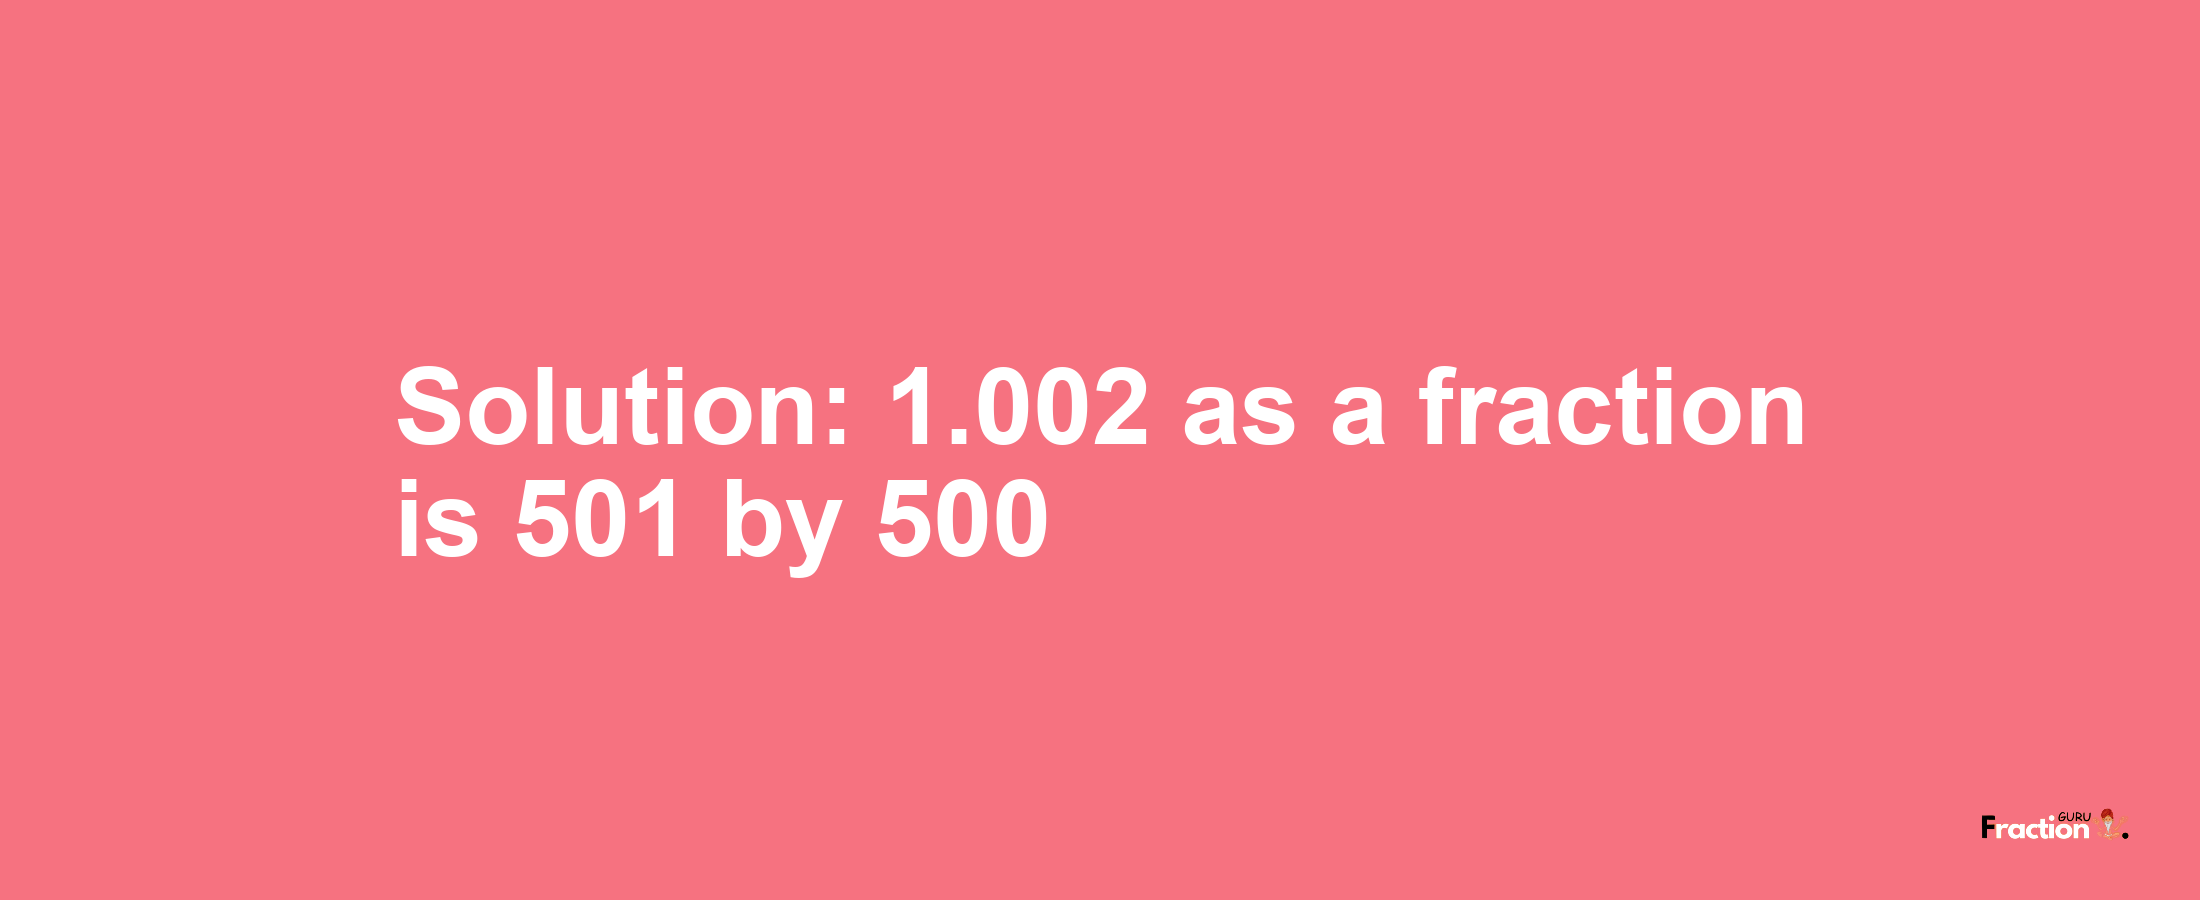 Solution:1.002 as a fraction is 501/500